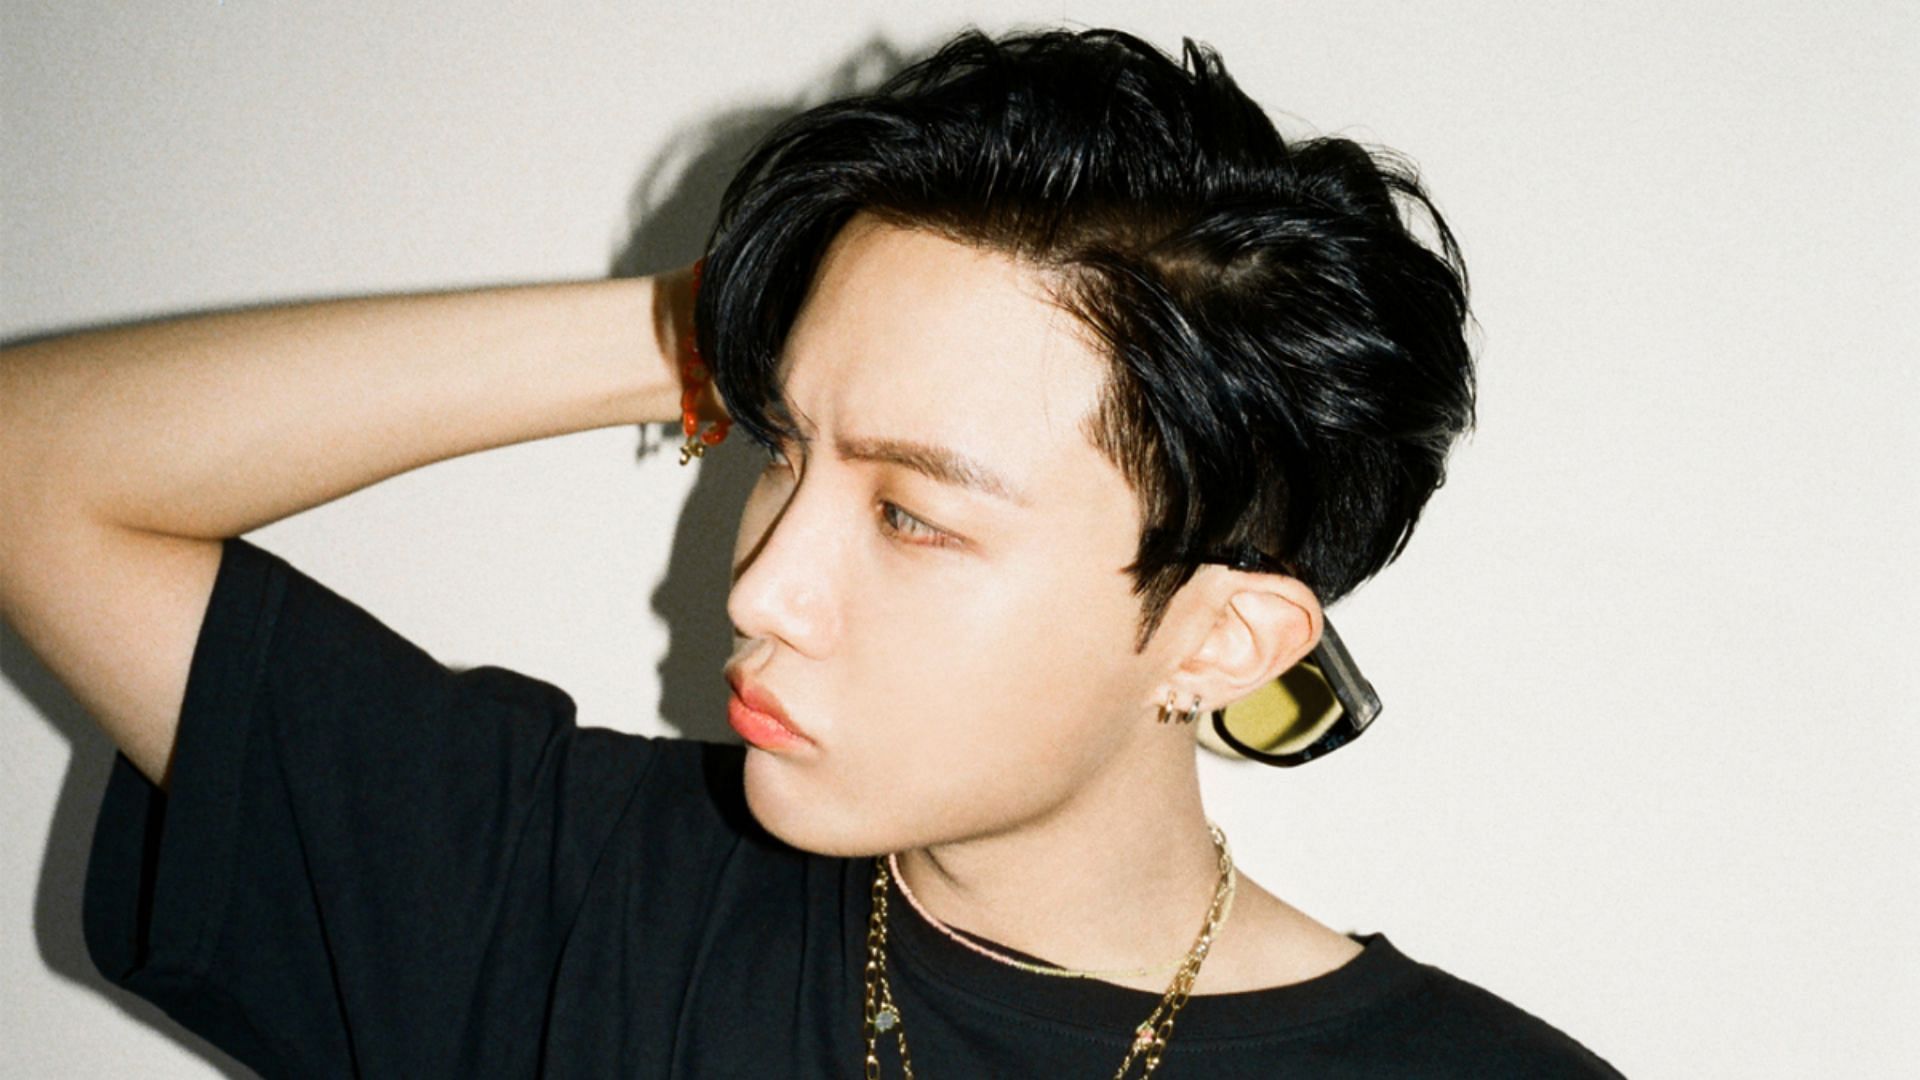 BTS' j-hope breaks the internet with a sizzling photoshoot for W